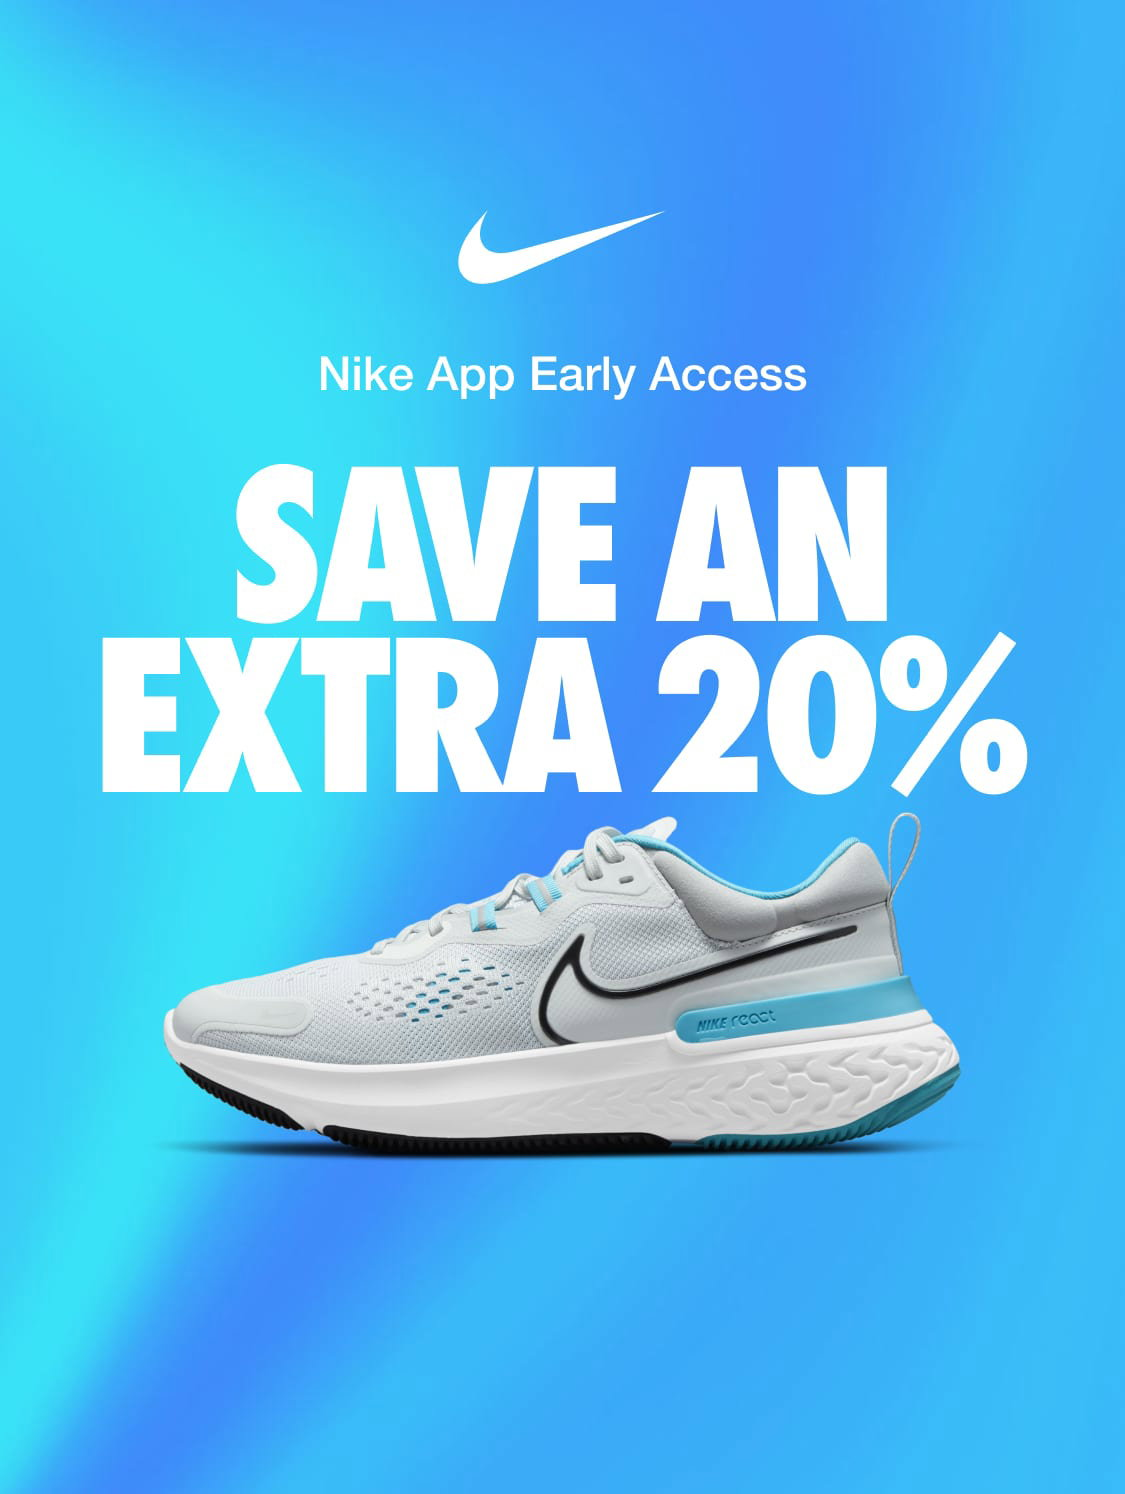 Nike plus +: Want an extra 20% off 